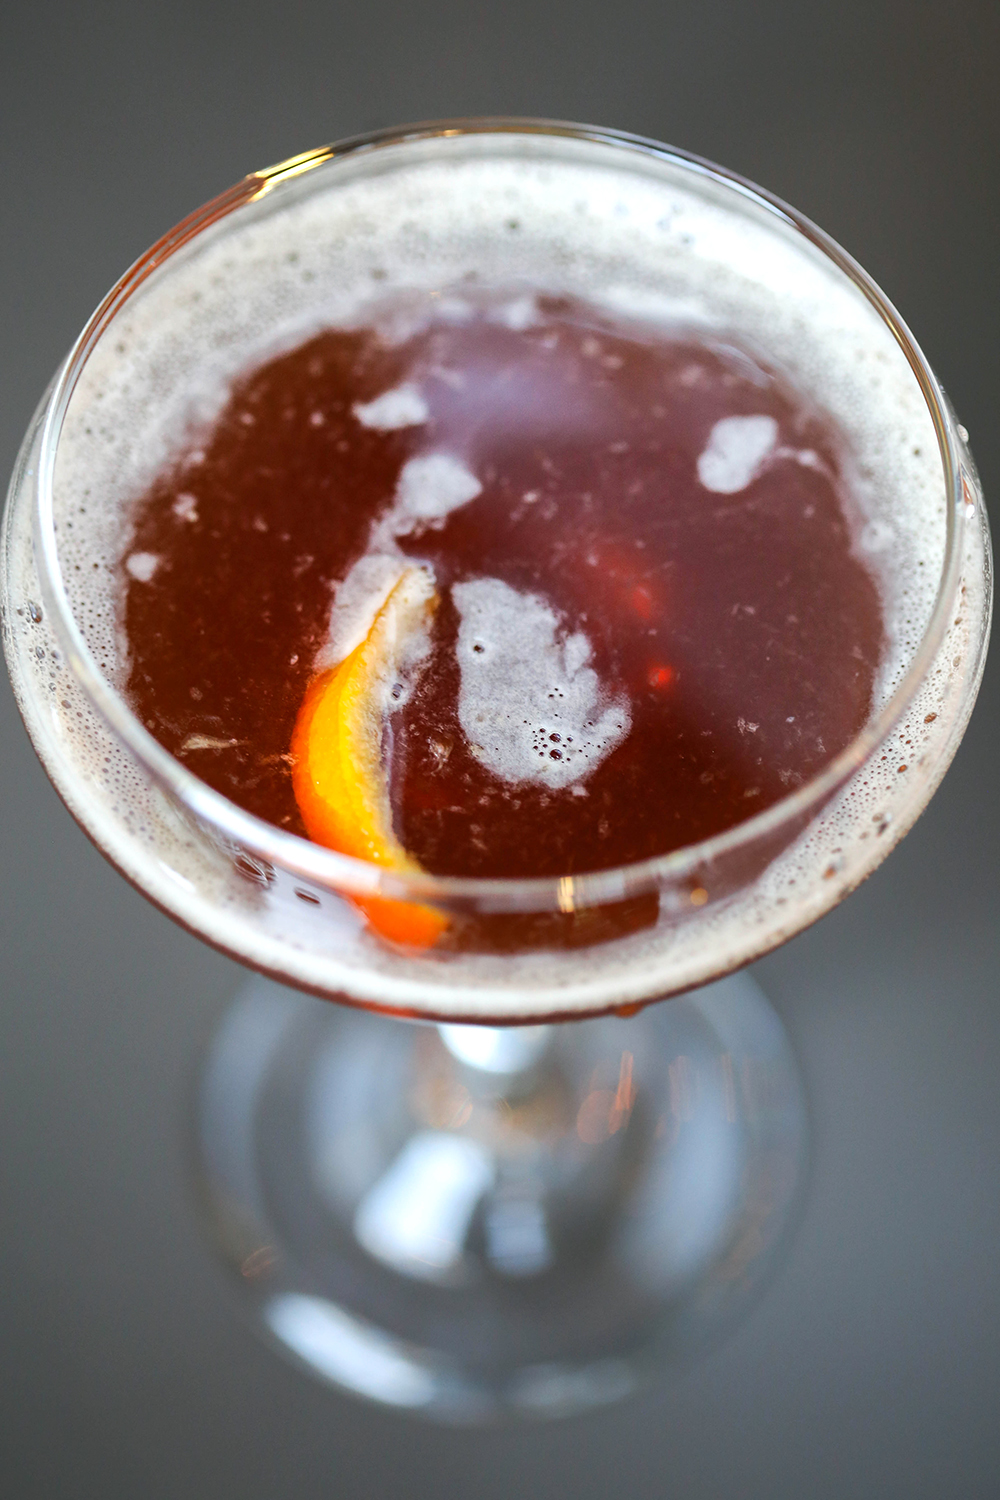 Blood & Sand: Del Maguey Crema De Mezcal, sweet vermouth, Cherry Heering and muddled orange. Photo by Catherine Downes.